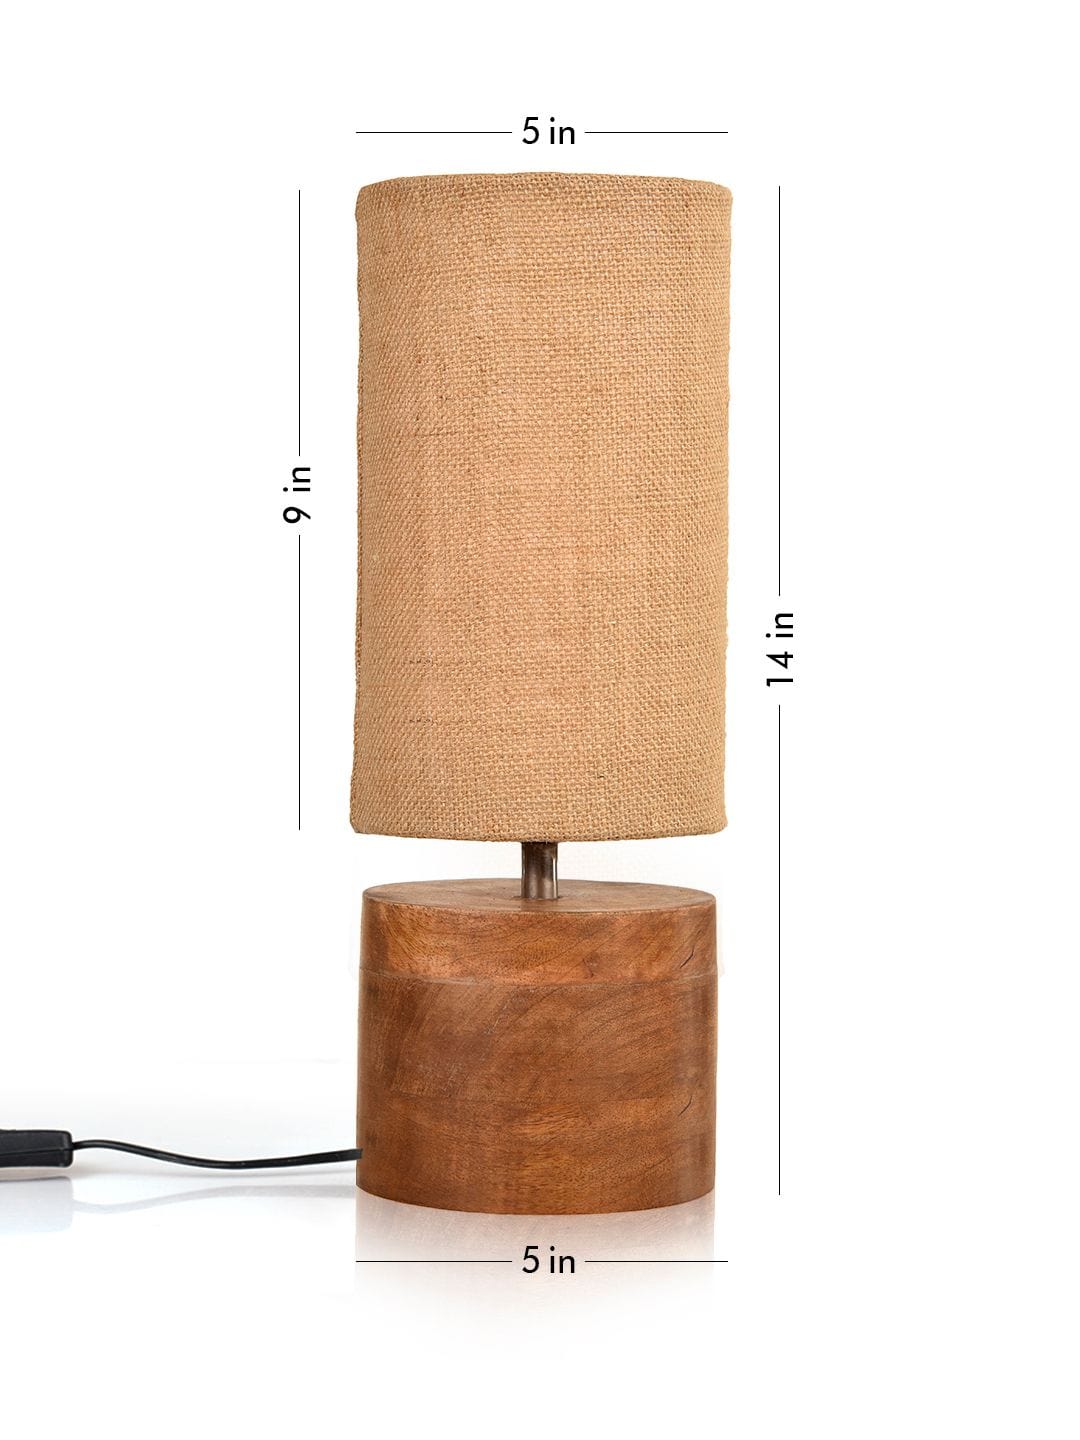 Wooden Log Table Lamp with Brown Jute Shade